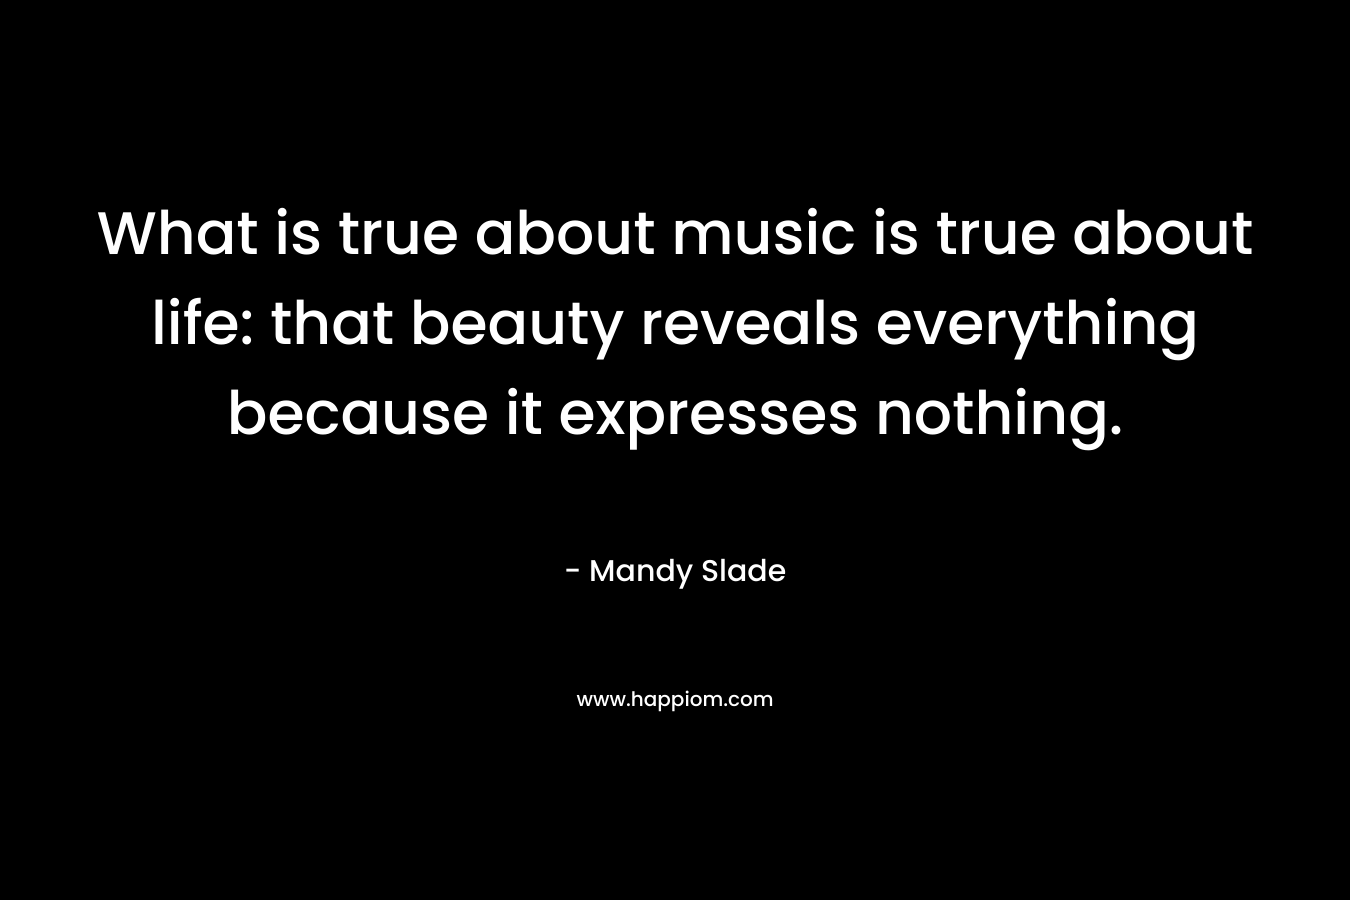 What is true about music is true about life: that beauty reveals everything because it expresses nothing.